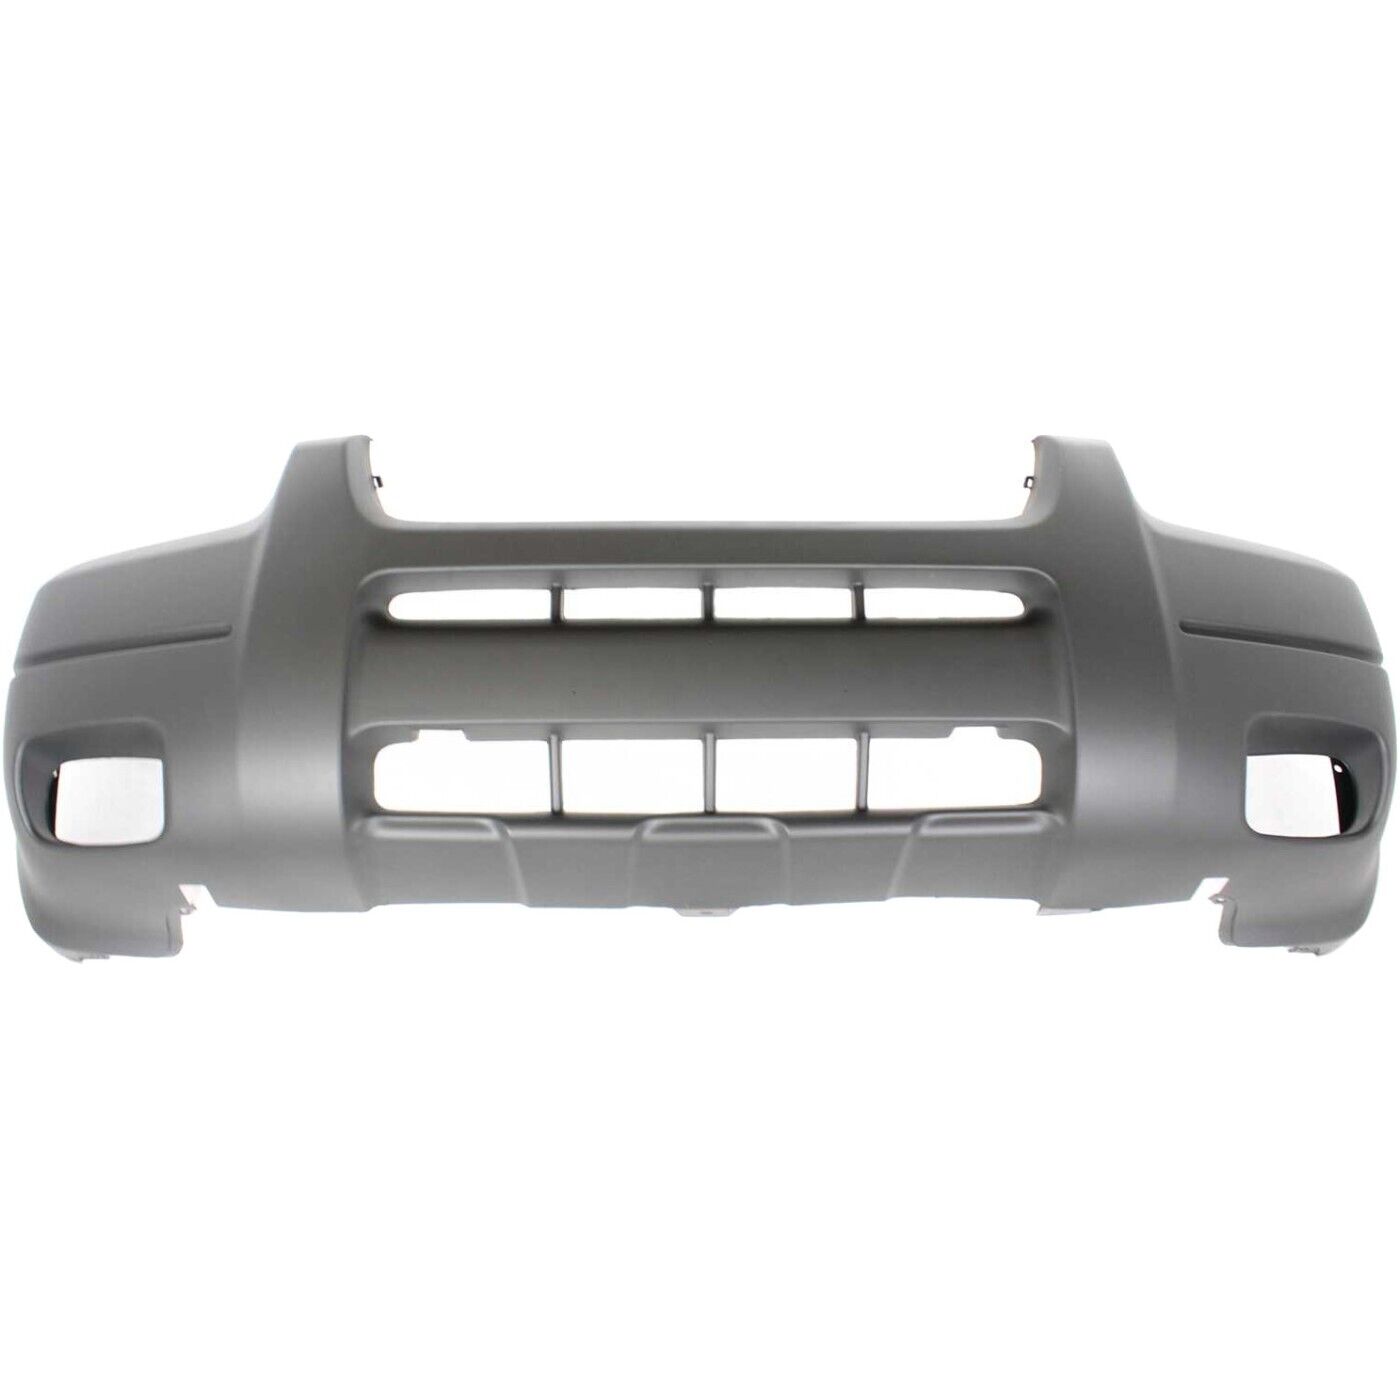 Front Bumper Cover For 2001-2004 Ford Escape w/ fog lamp holes Textured